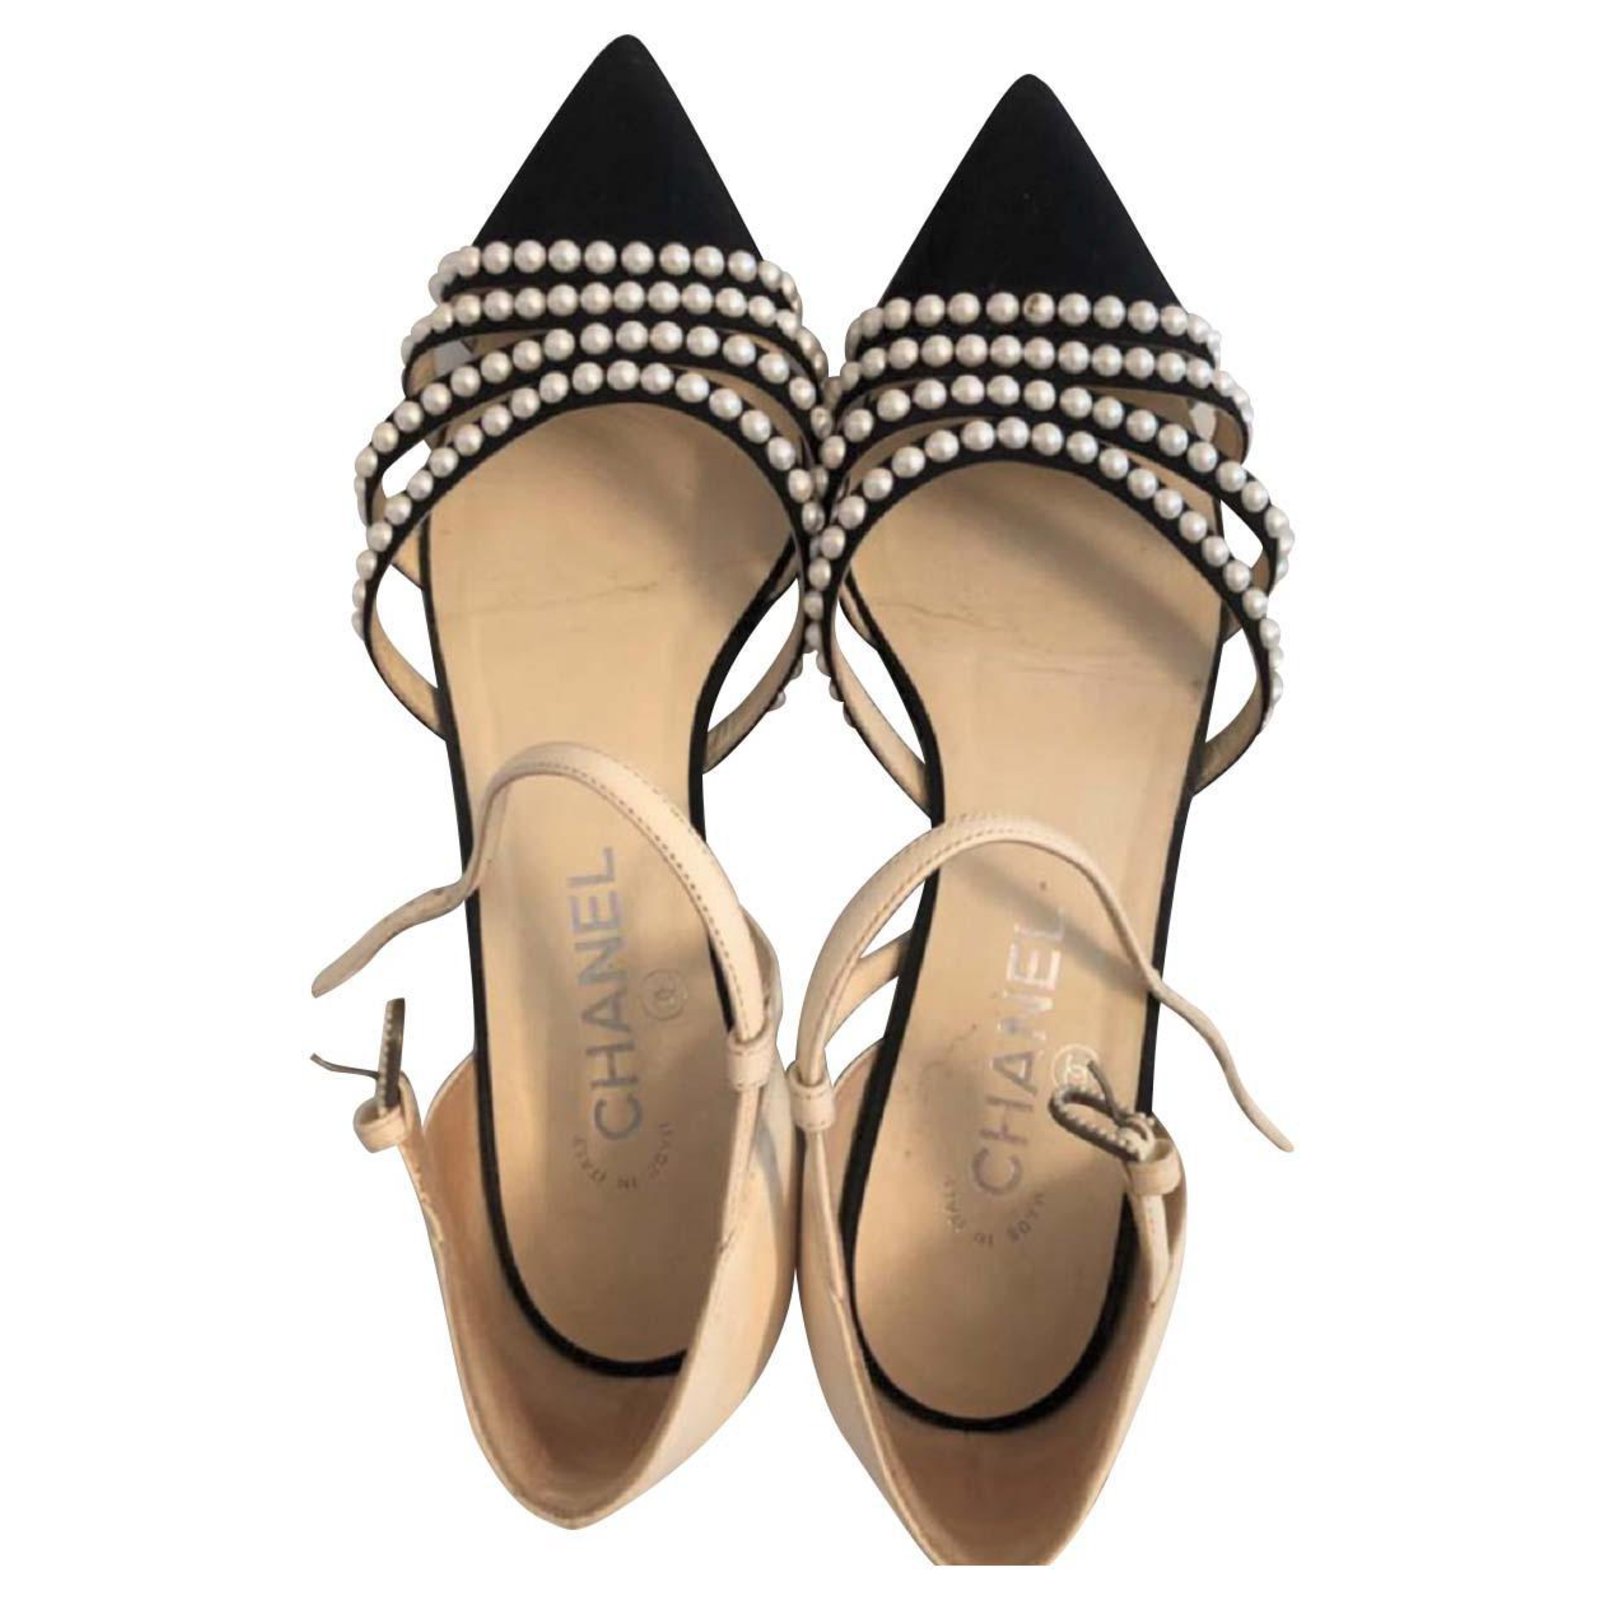 chanel flats with pearls